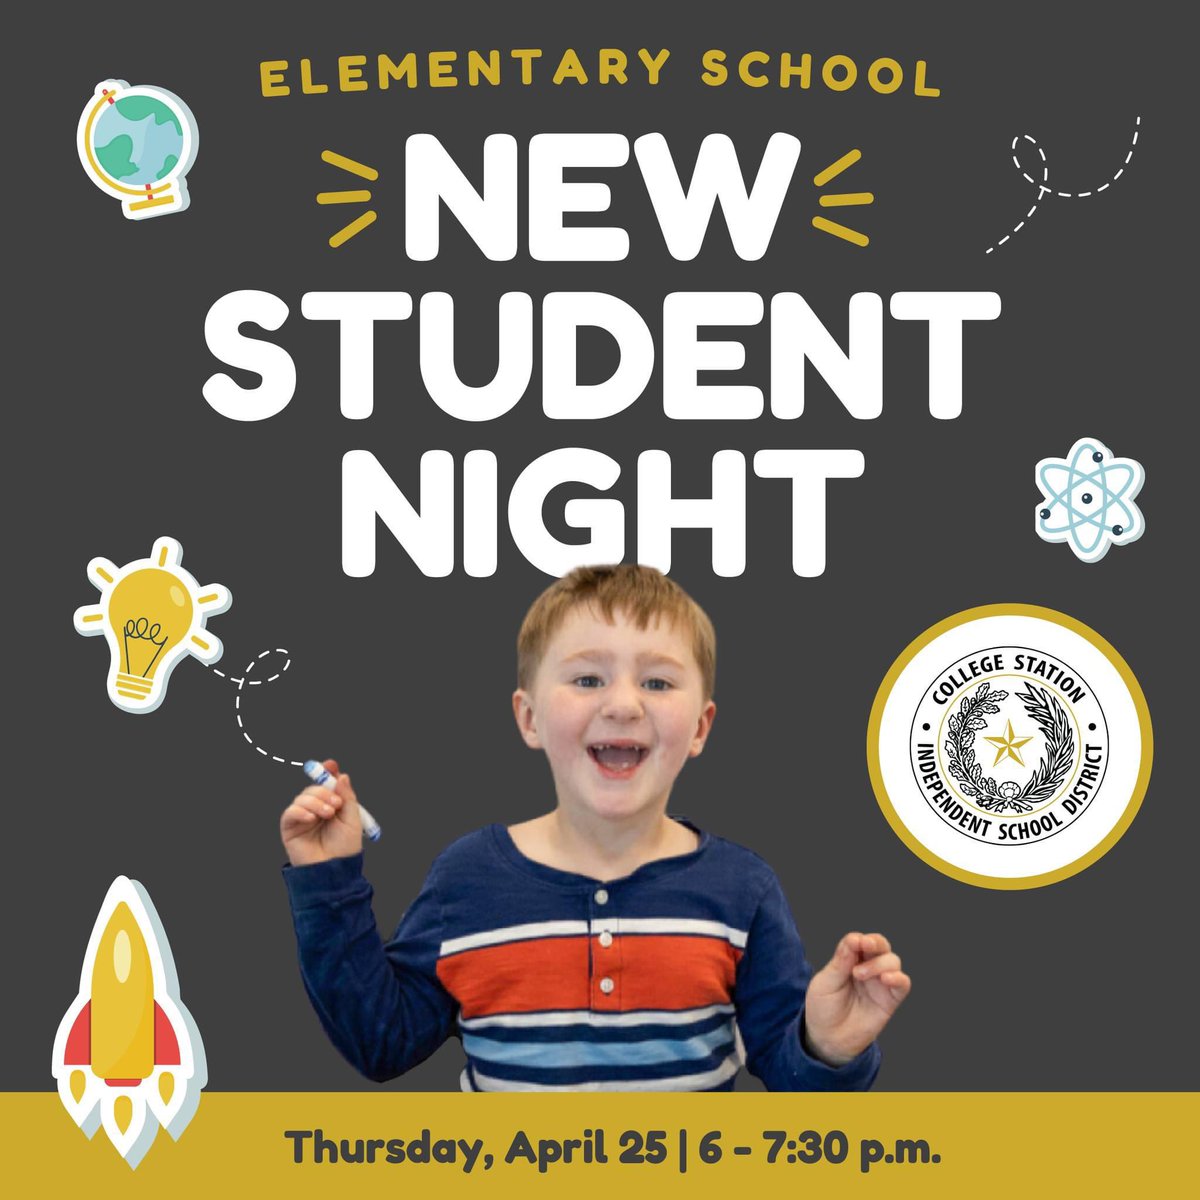 Join us at our elementary schools for New Student Night this Thursday, April 25 from 6-7:30 p.m.!🎉 This come-and-go open house event is for new elementary families (grades K-4) We can't wait to meet you! #SuccessCSISD